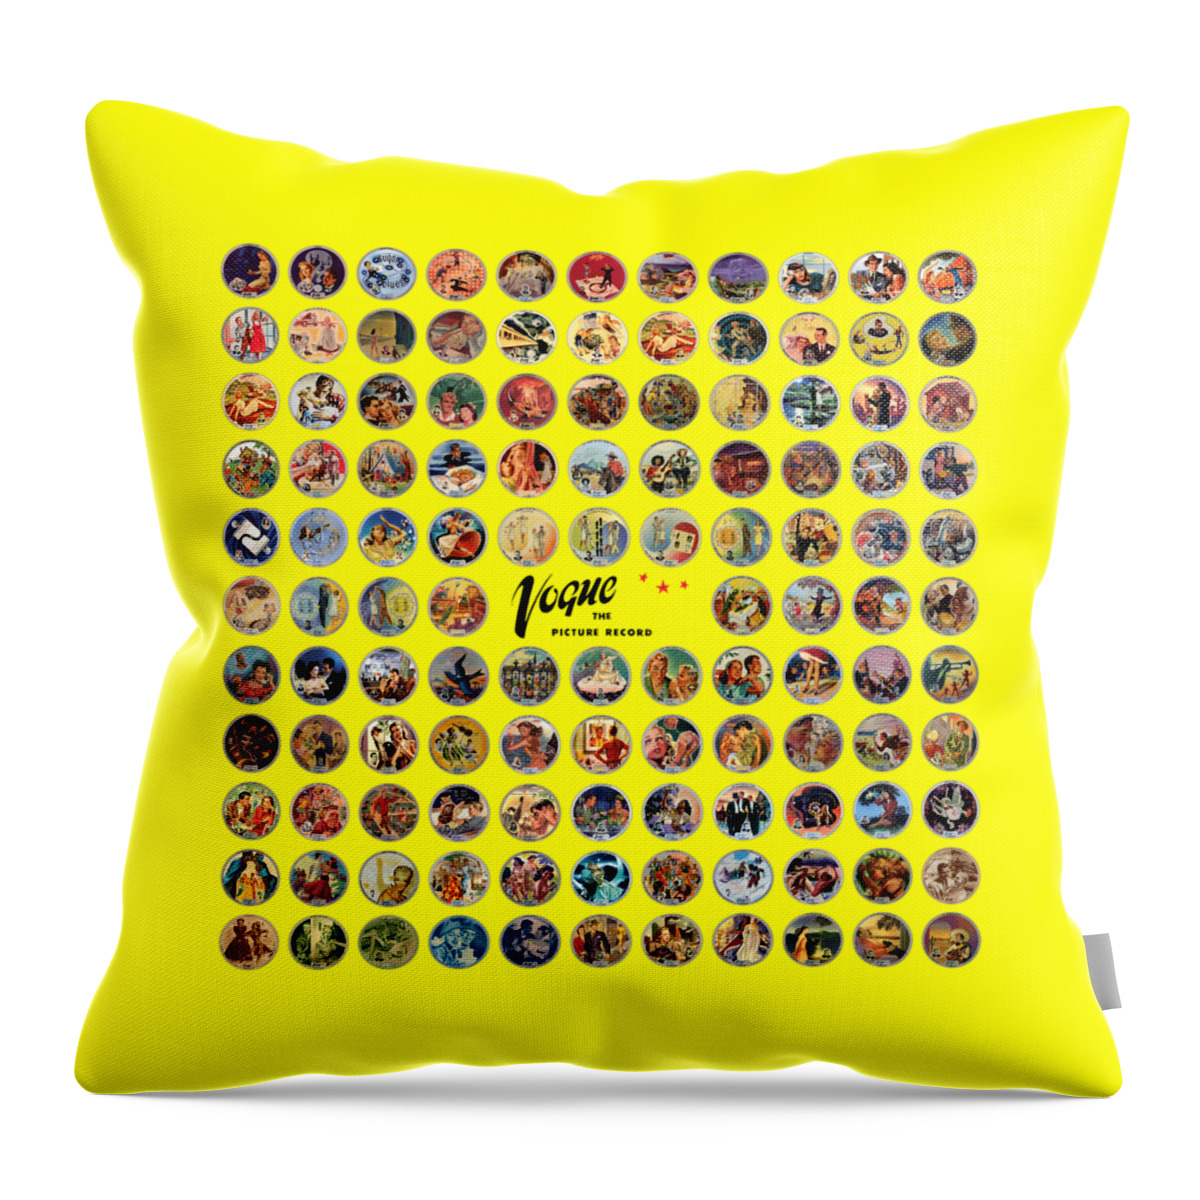 Vogue Picture Record Throw Pillow featuring the digital art Complete Vogue Picture Records - Square Version by Studio B Prints